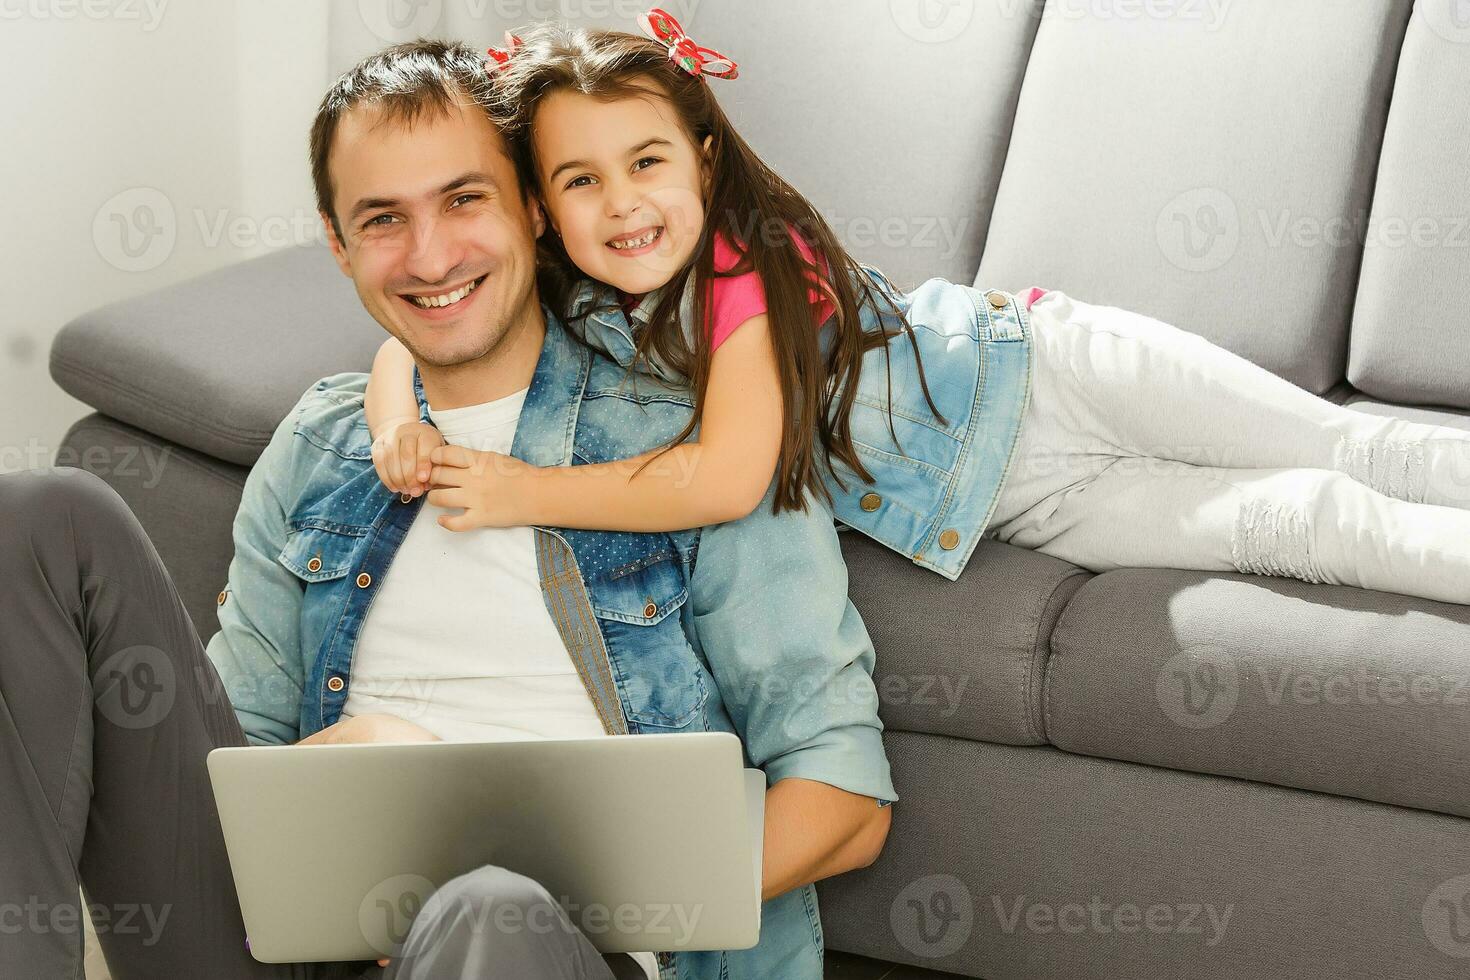 Bearded man and little girl at home family time sitting on floor on carpet browsing laptop together smiling joyful photo